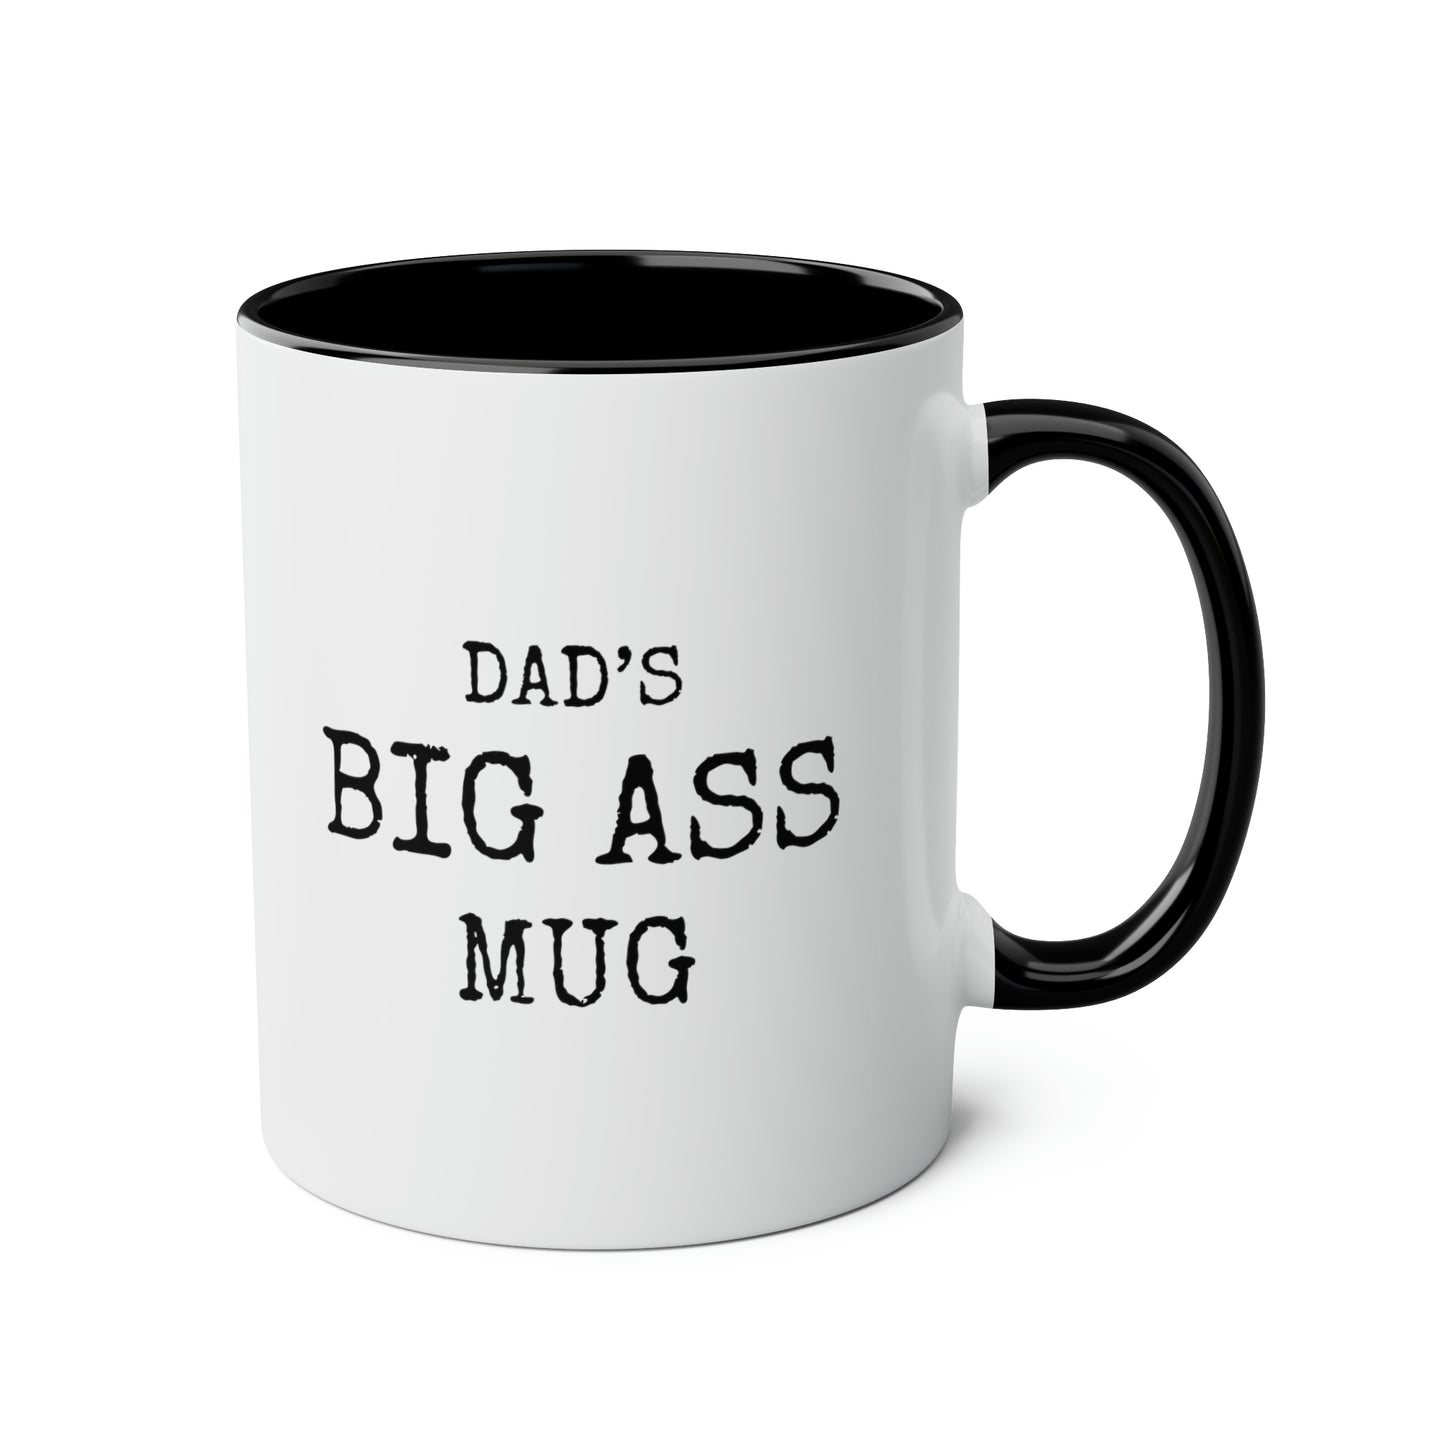 Dad's Big Ass Mug 11oz white with black accent funny large coffee mug gift for fathers day custom name waveywares wavey wares wavywares wavy wares